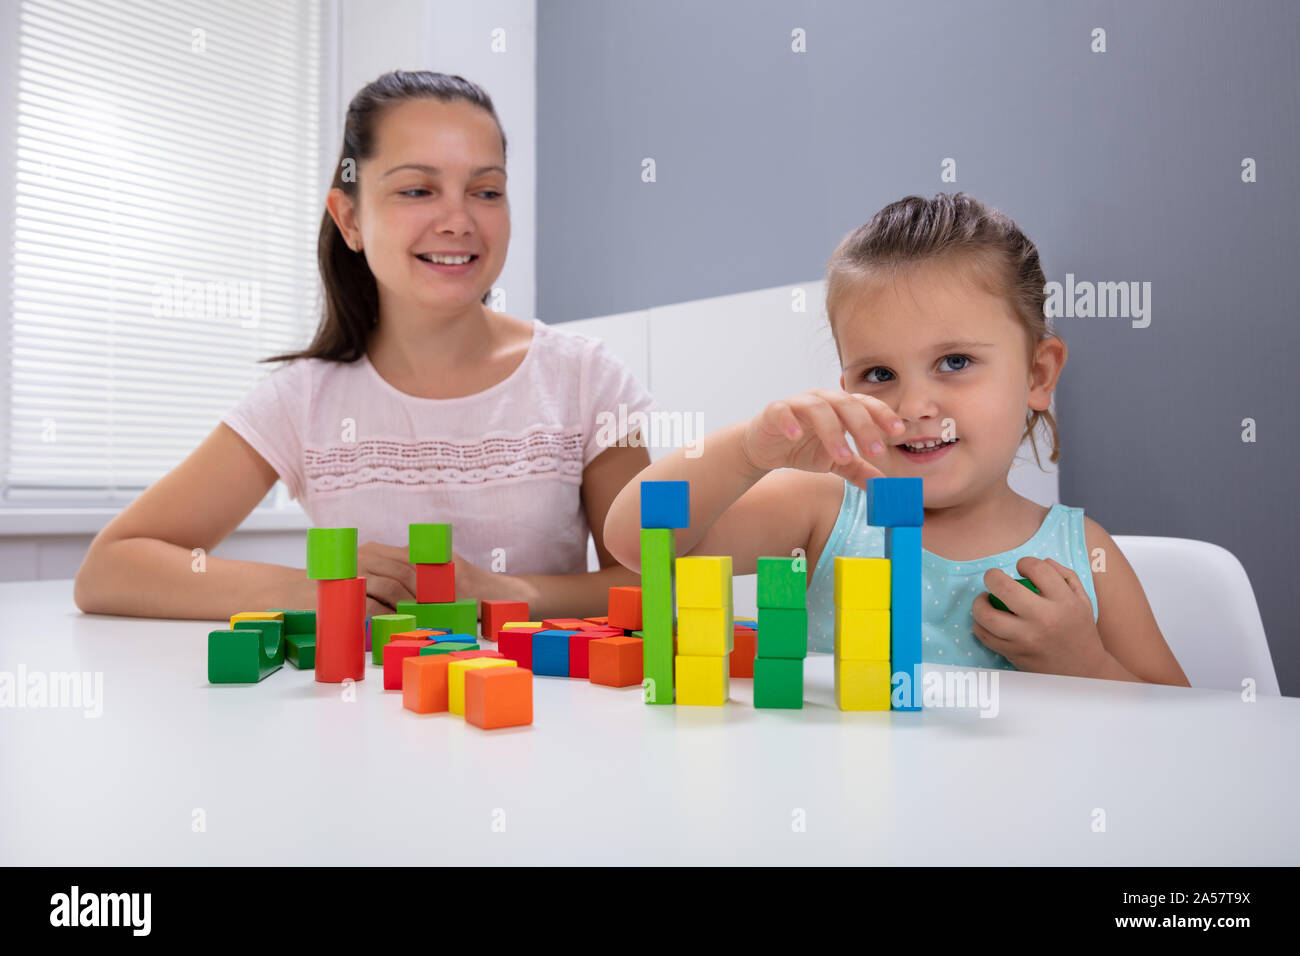 Smiling Daycare Worker Playing With Child Stacking Building Blocks On White Desk Stock Photo